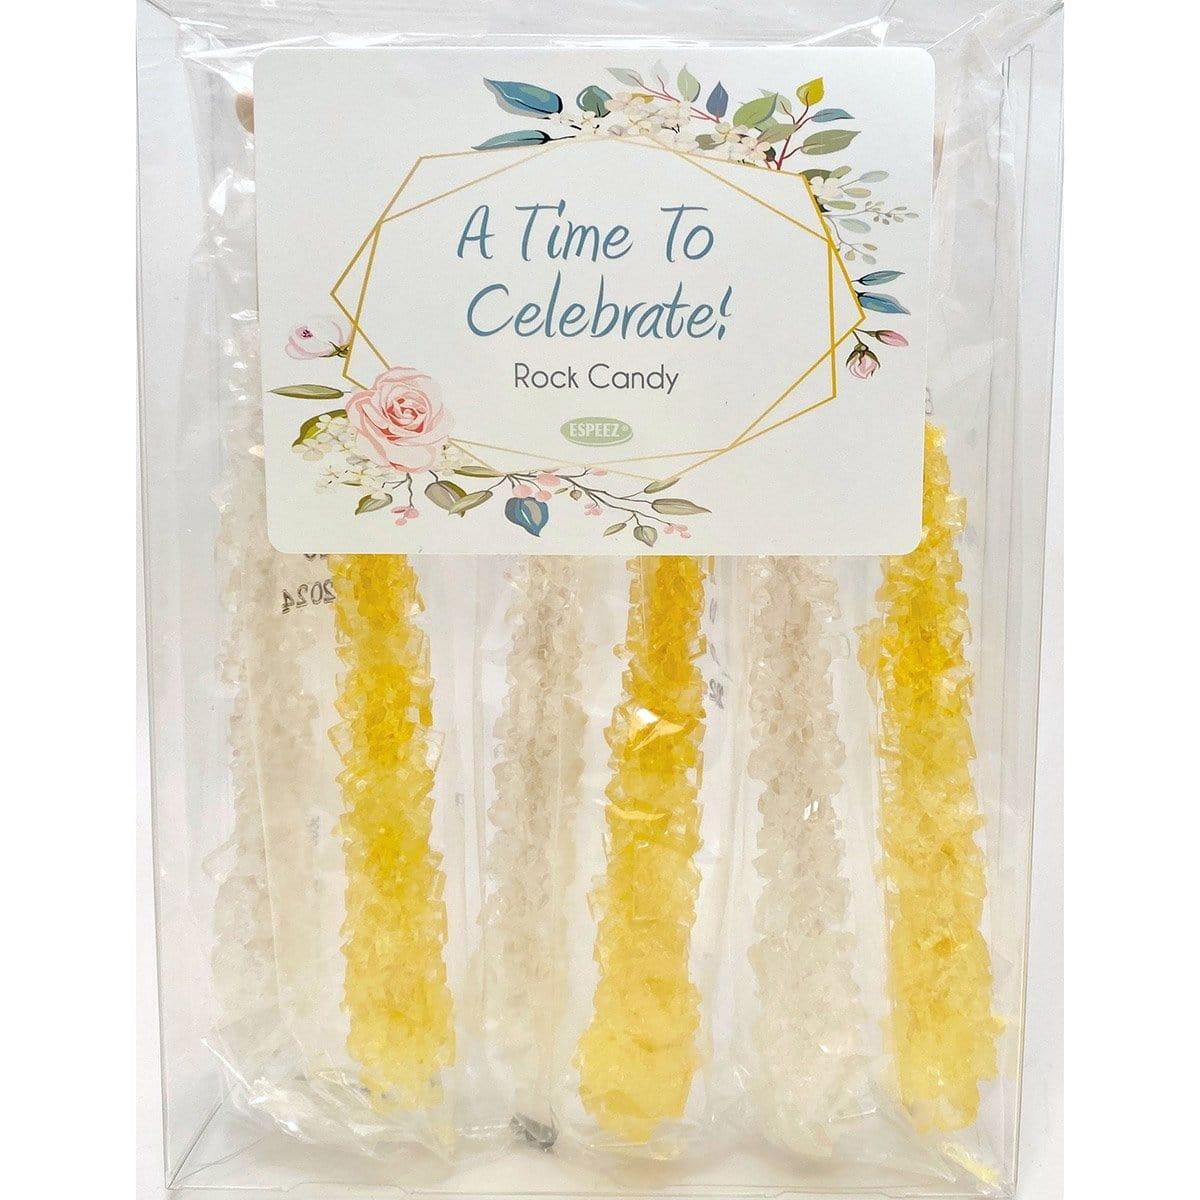 Buy Candy Bridal Rock Candy On Stick, 6 Count sold at Party Expert